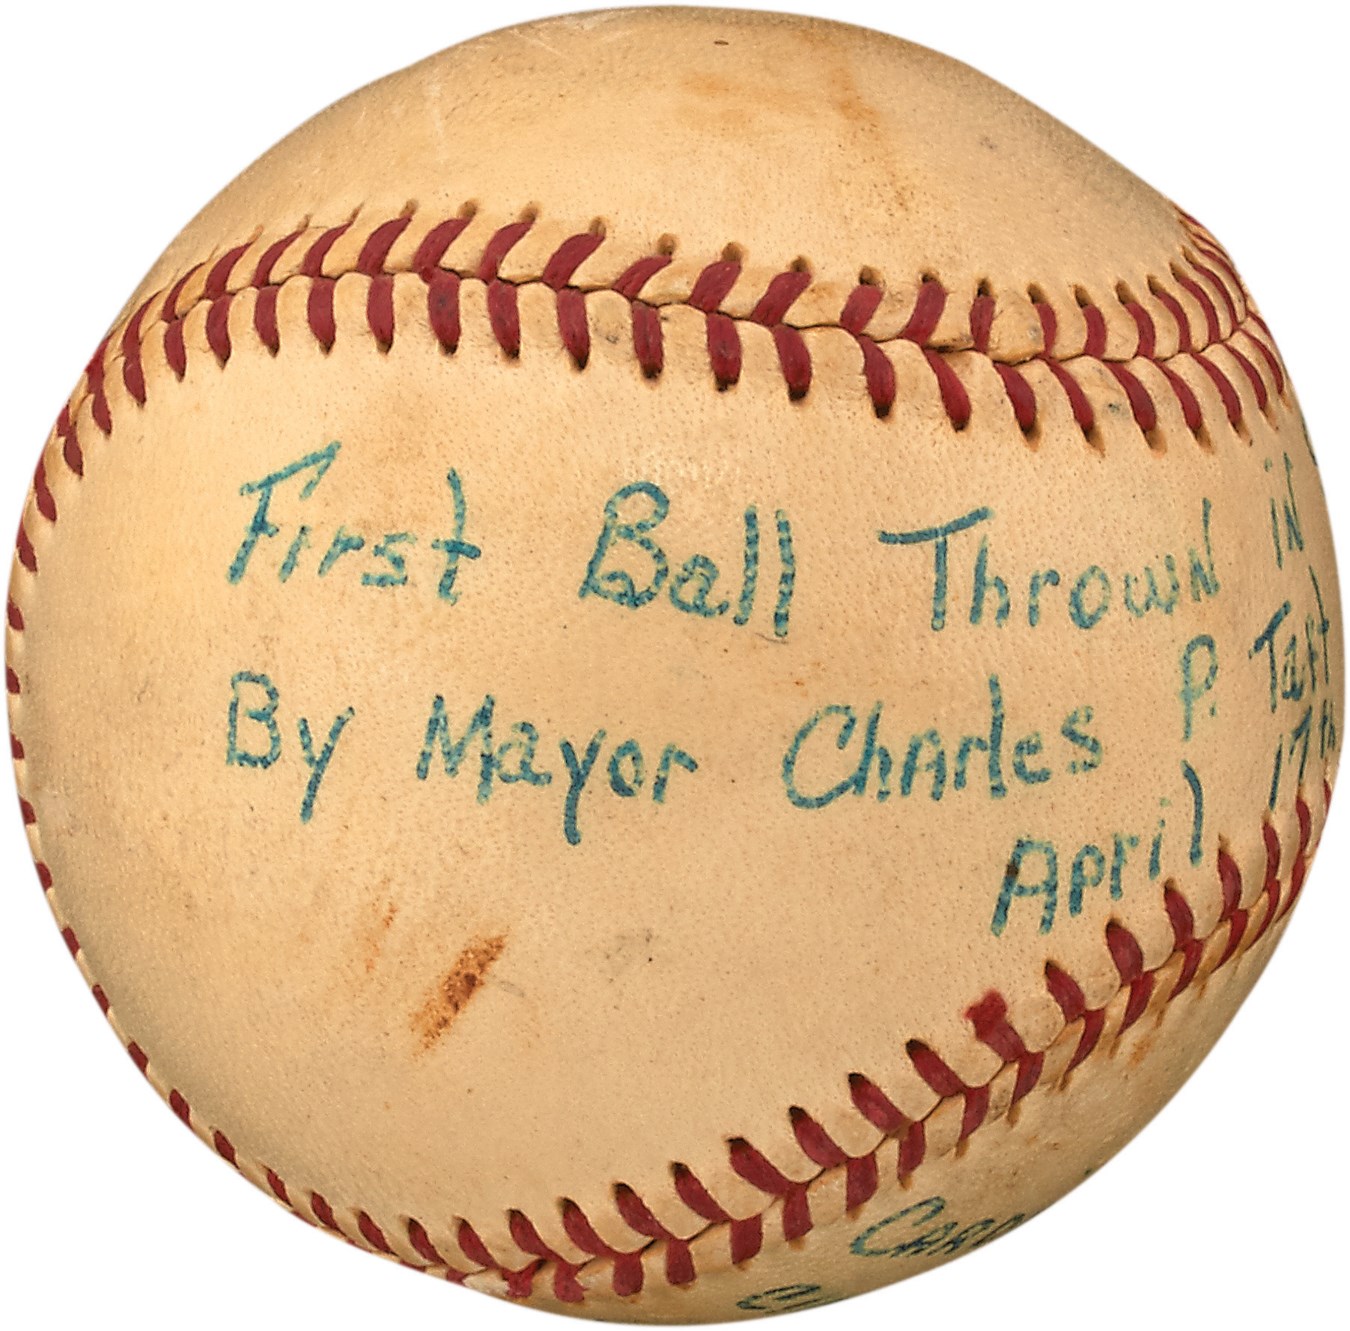 - 1956 Frank Robinson “Debut” First Pitch Baseball from MLer Hal R. Smith